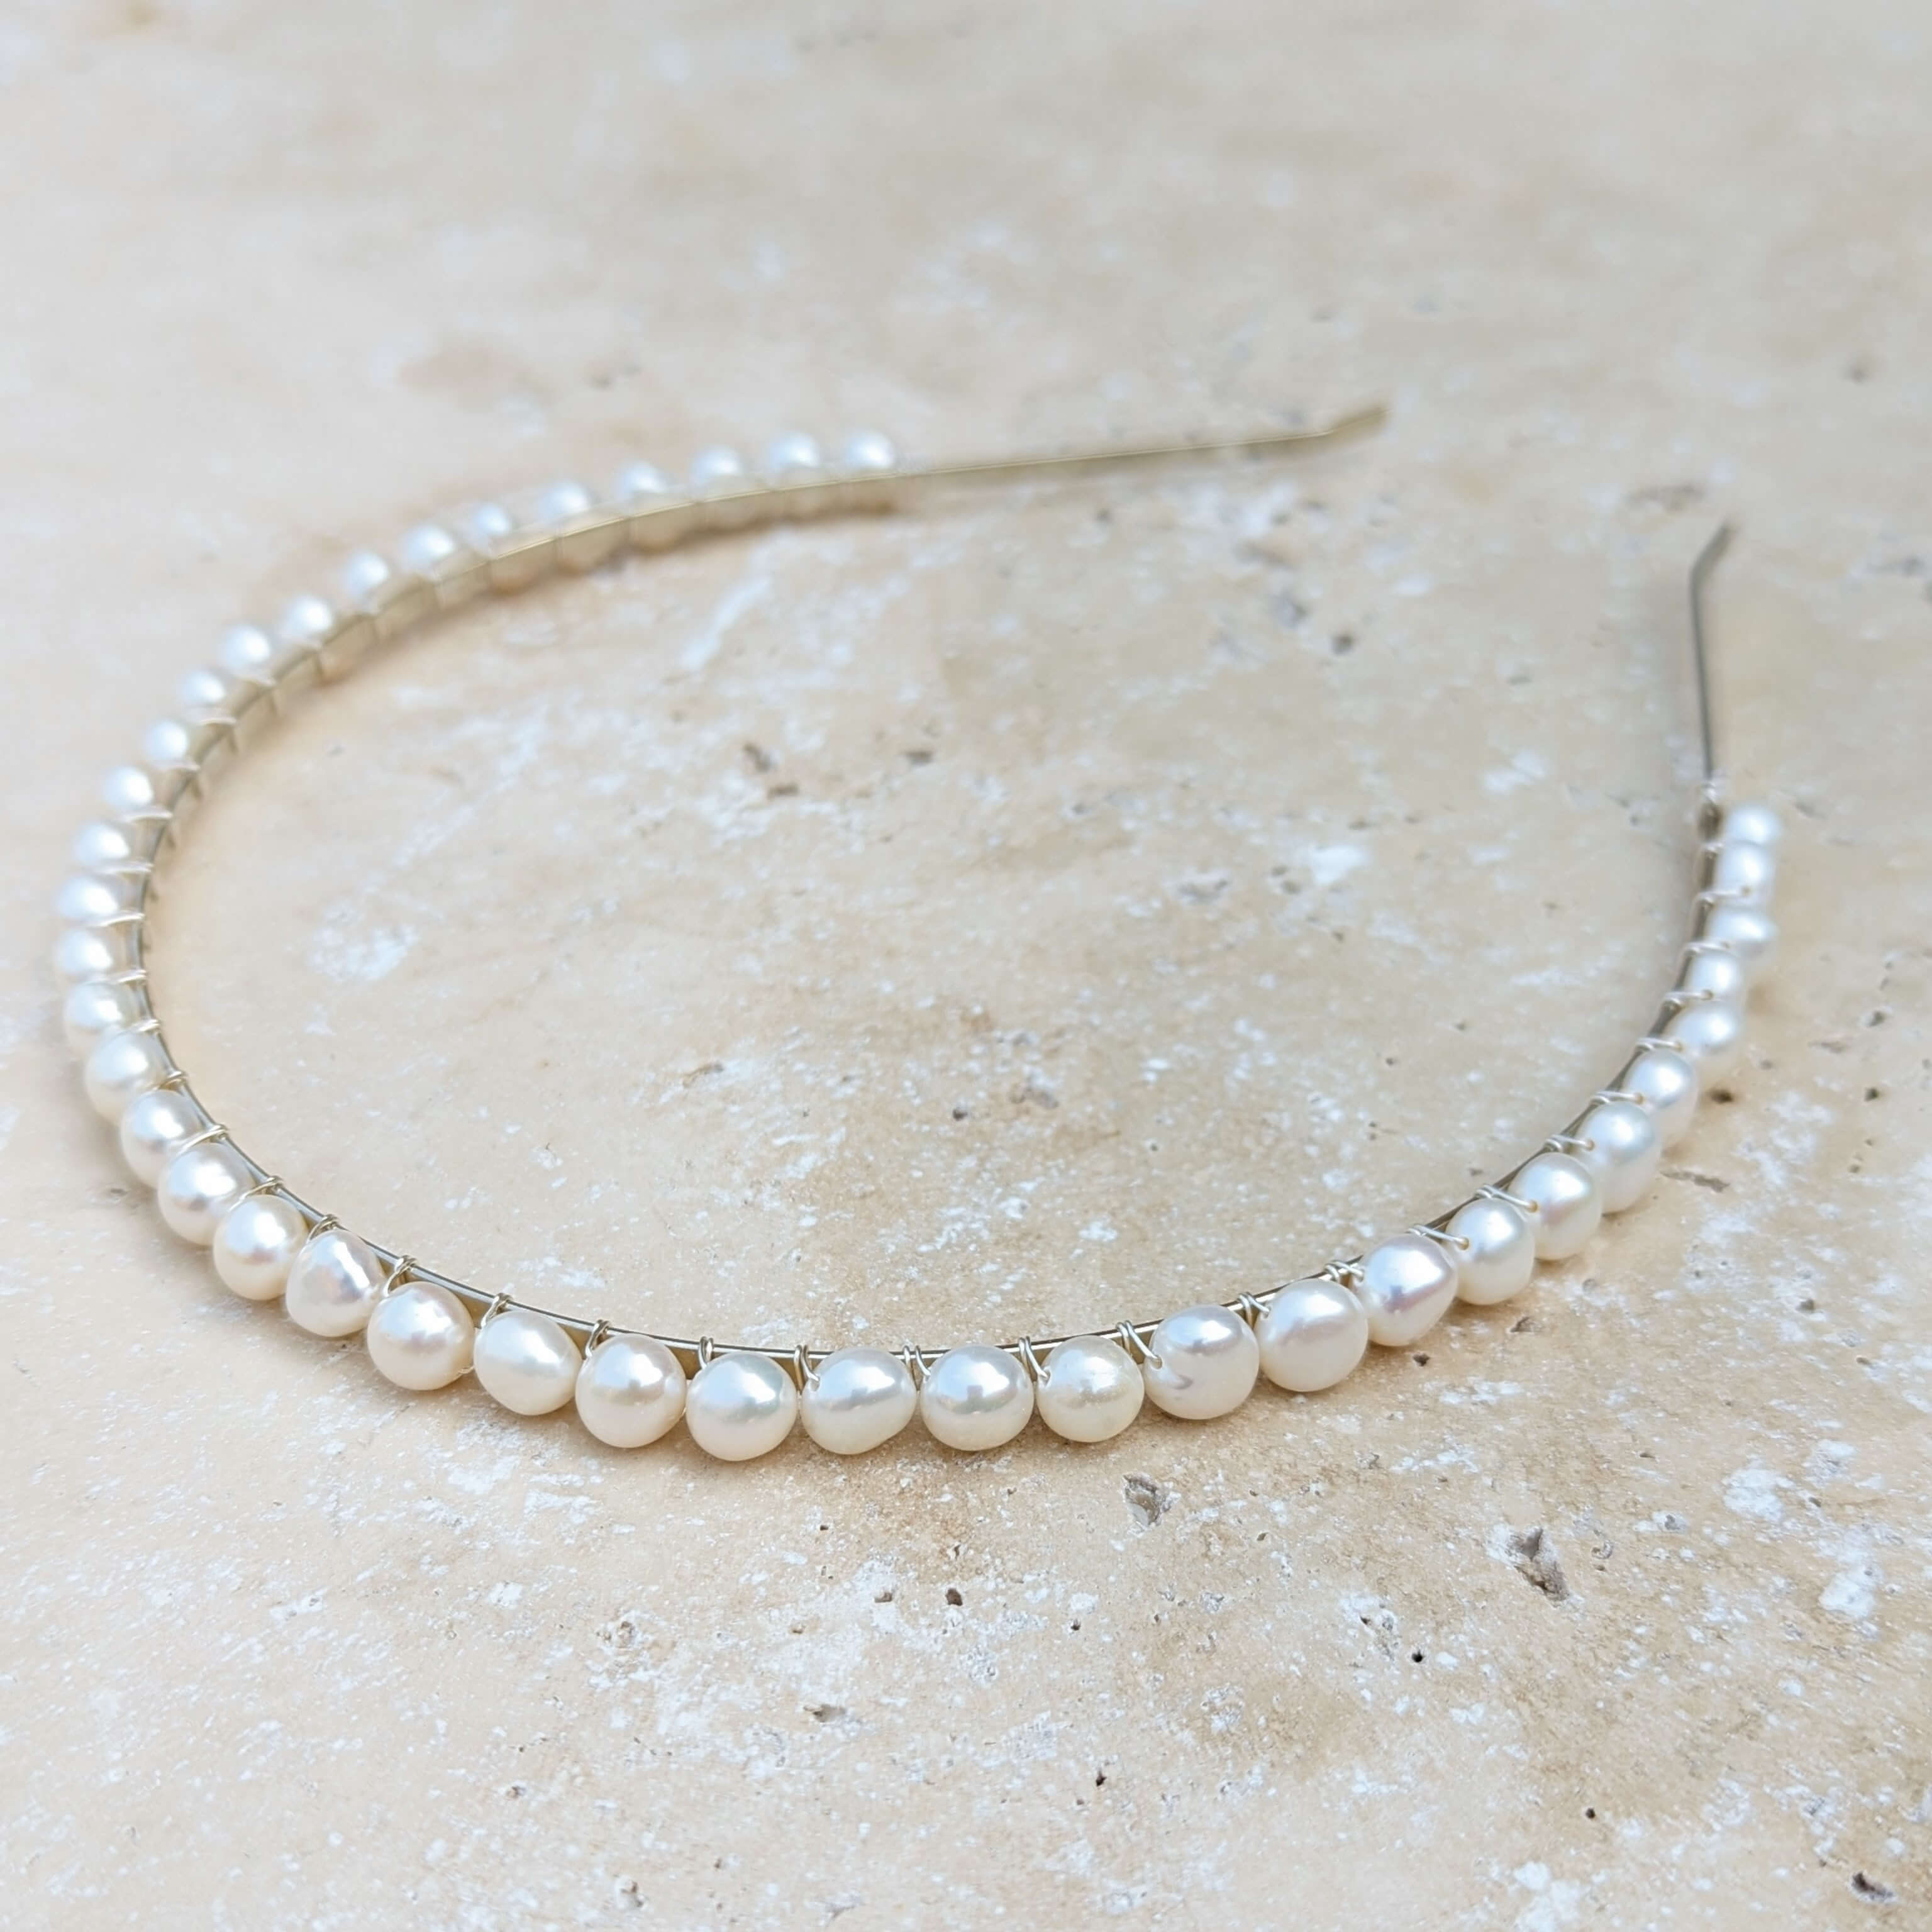 Genuine real pearl headband made with silver colour metal band